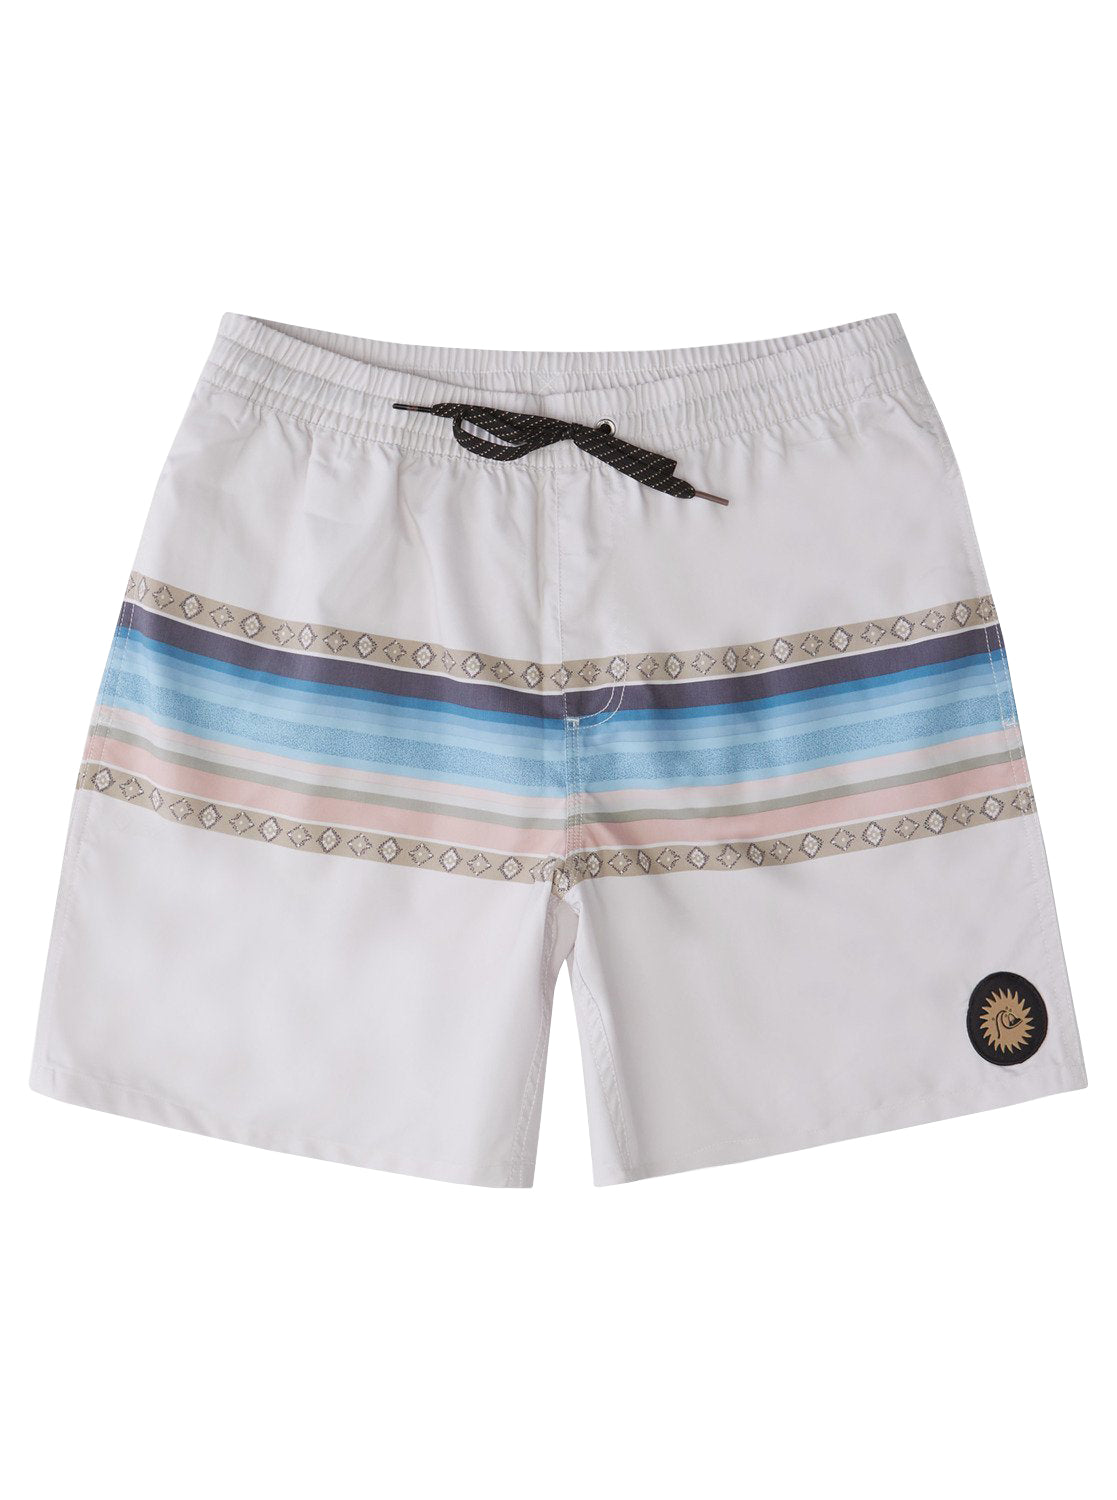 Quiksilver Sun Faded 17 Volley